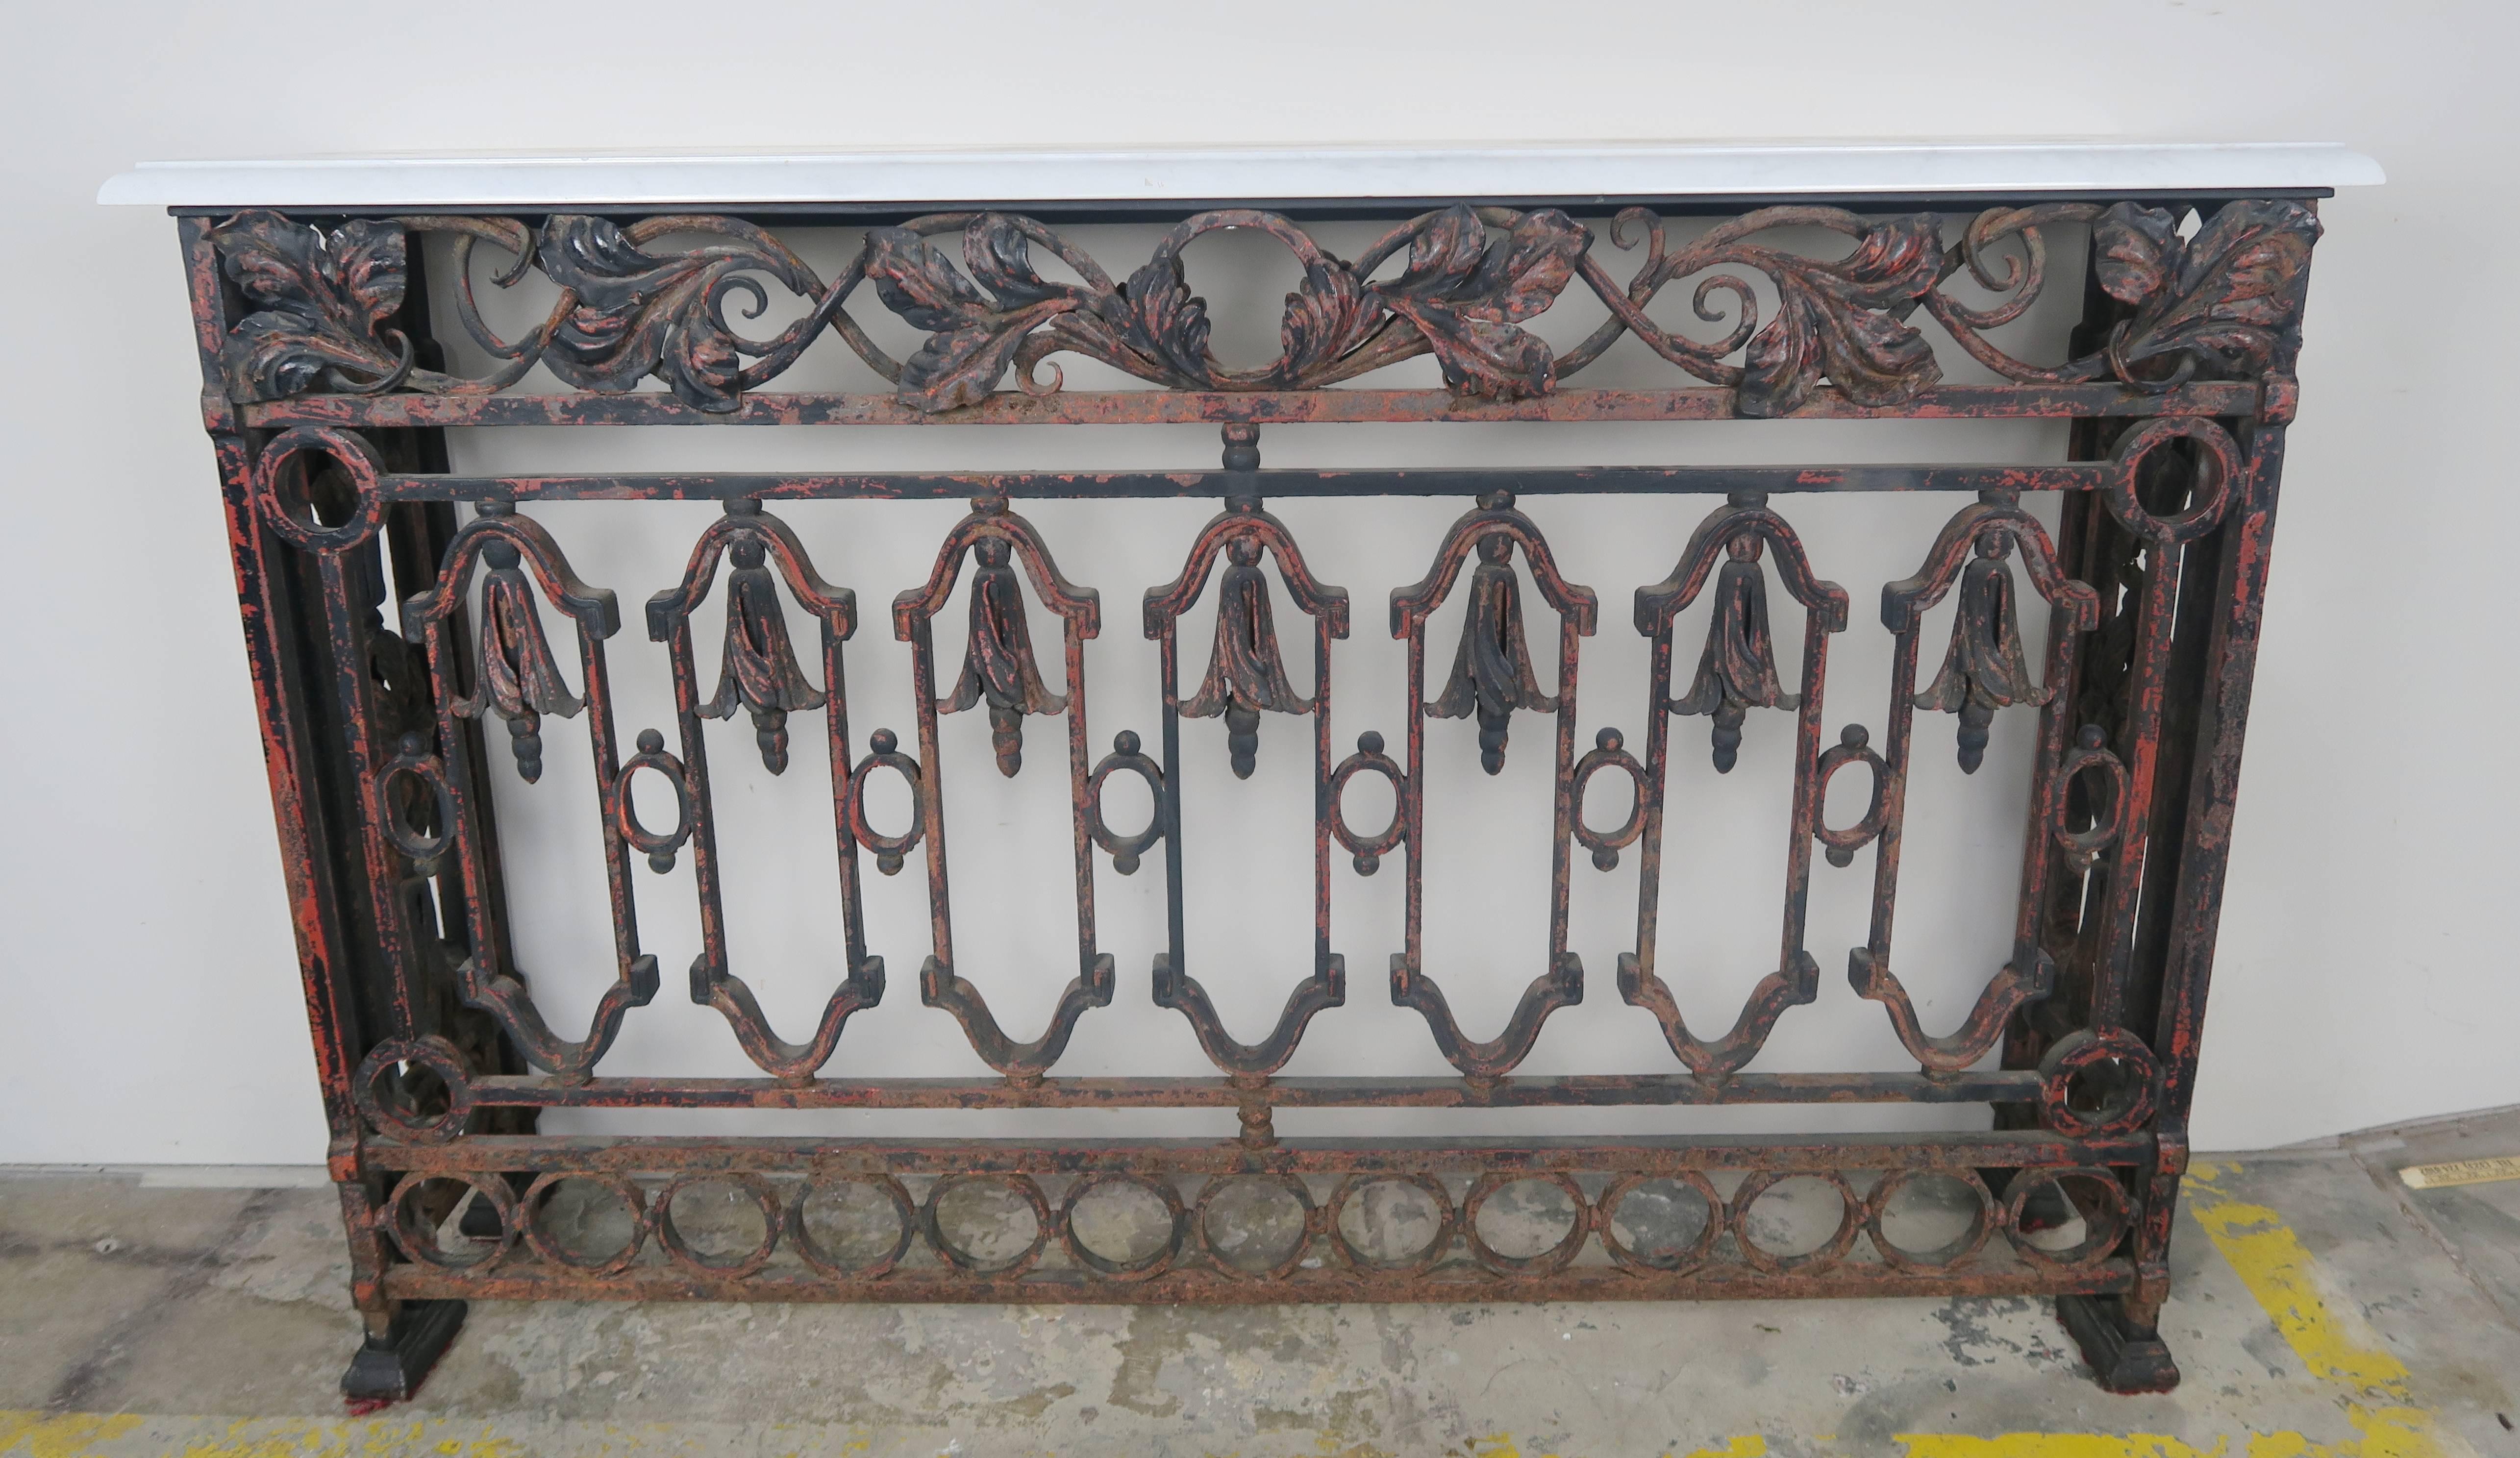 French wrought iron Renaissance style console with Carrara marble top. Remnants of rust paint can still be seen throughout giving the console a beautiful patina.